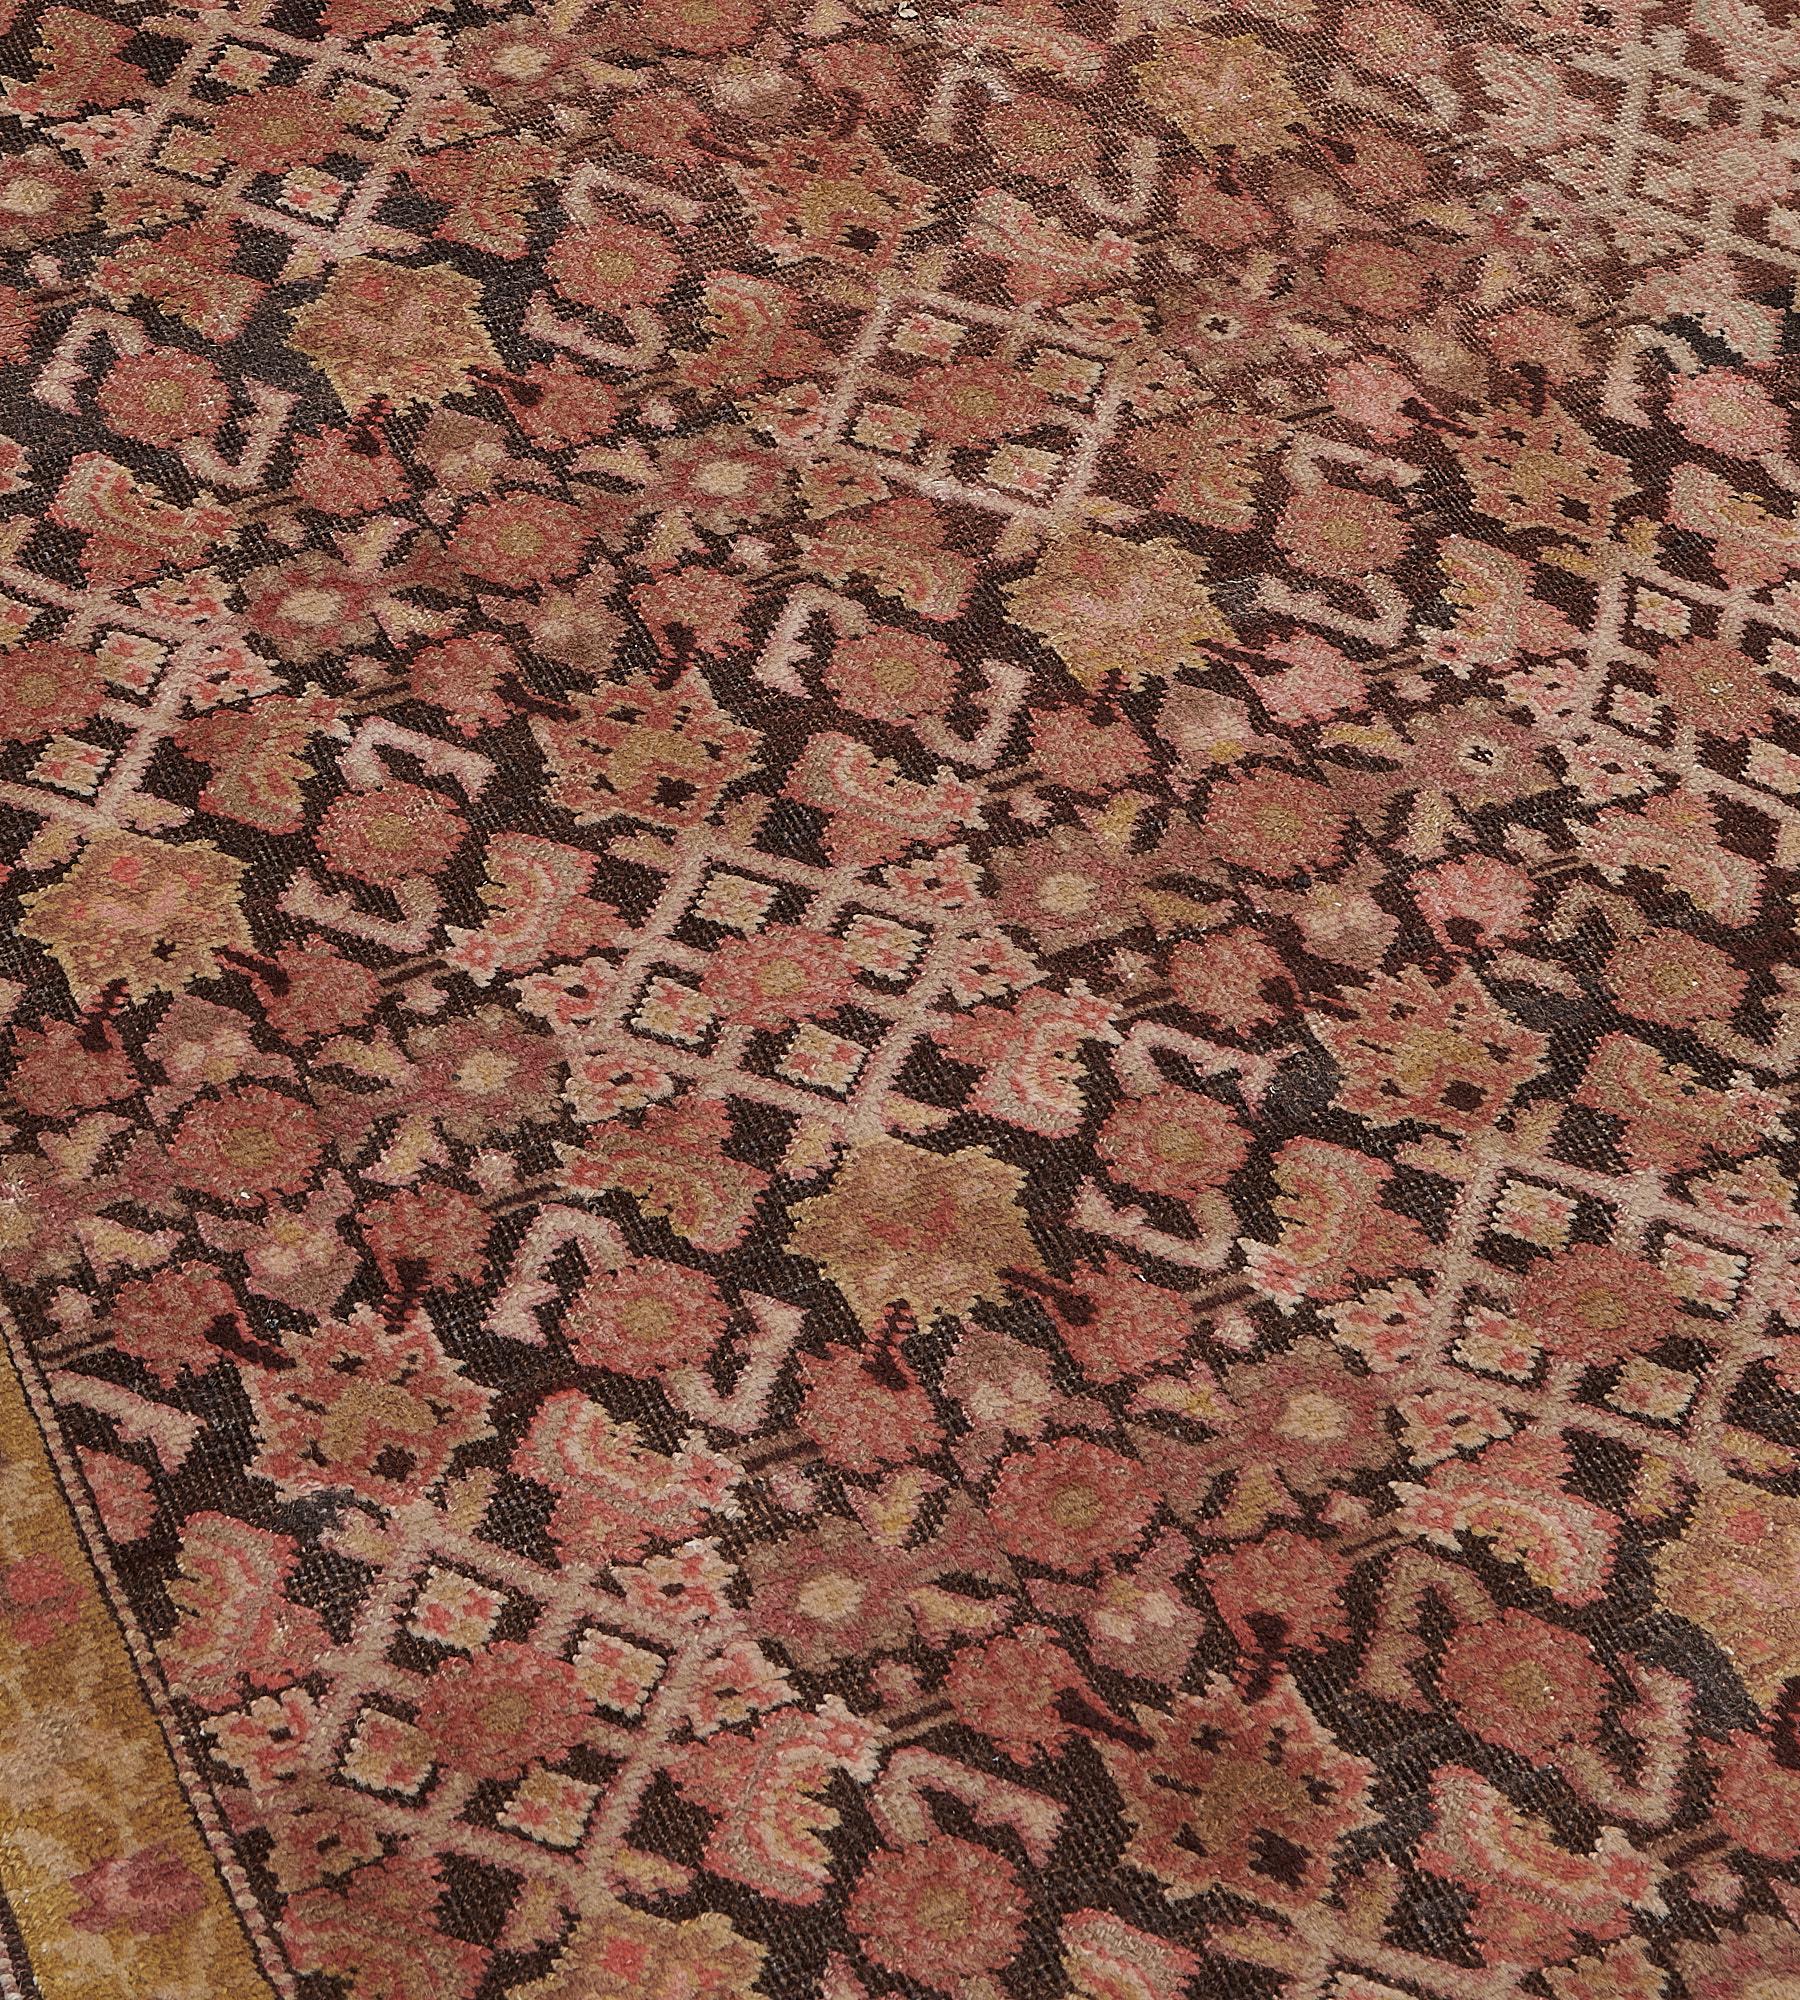 This antique Karabagh Runner has a chocolate-brown field with an overall brick-red and shaded brown herati-pattern design, in a narrow lime-yellow border of meandering flowerhead vine between narrow barber-pole stripes.